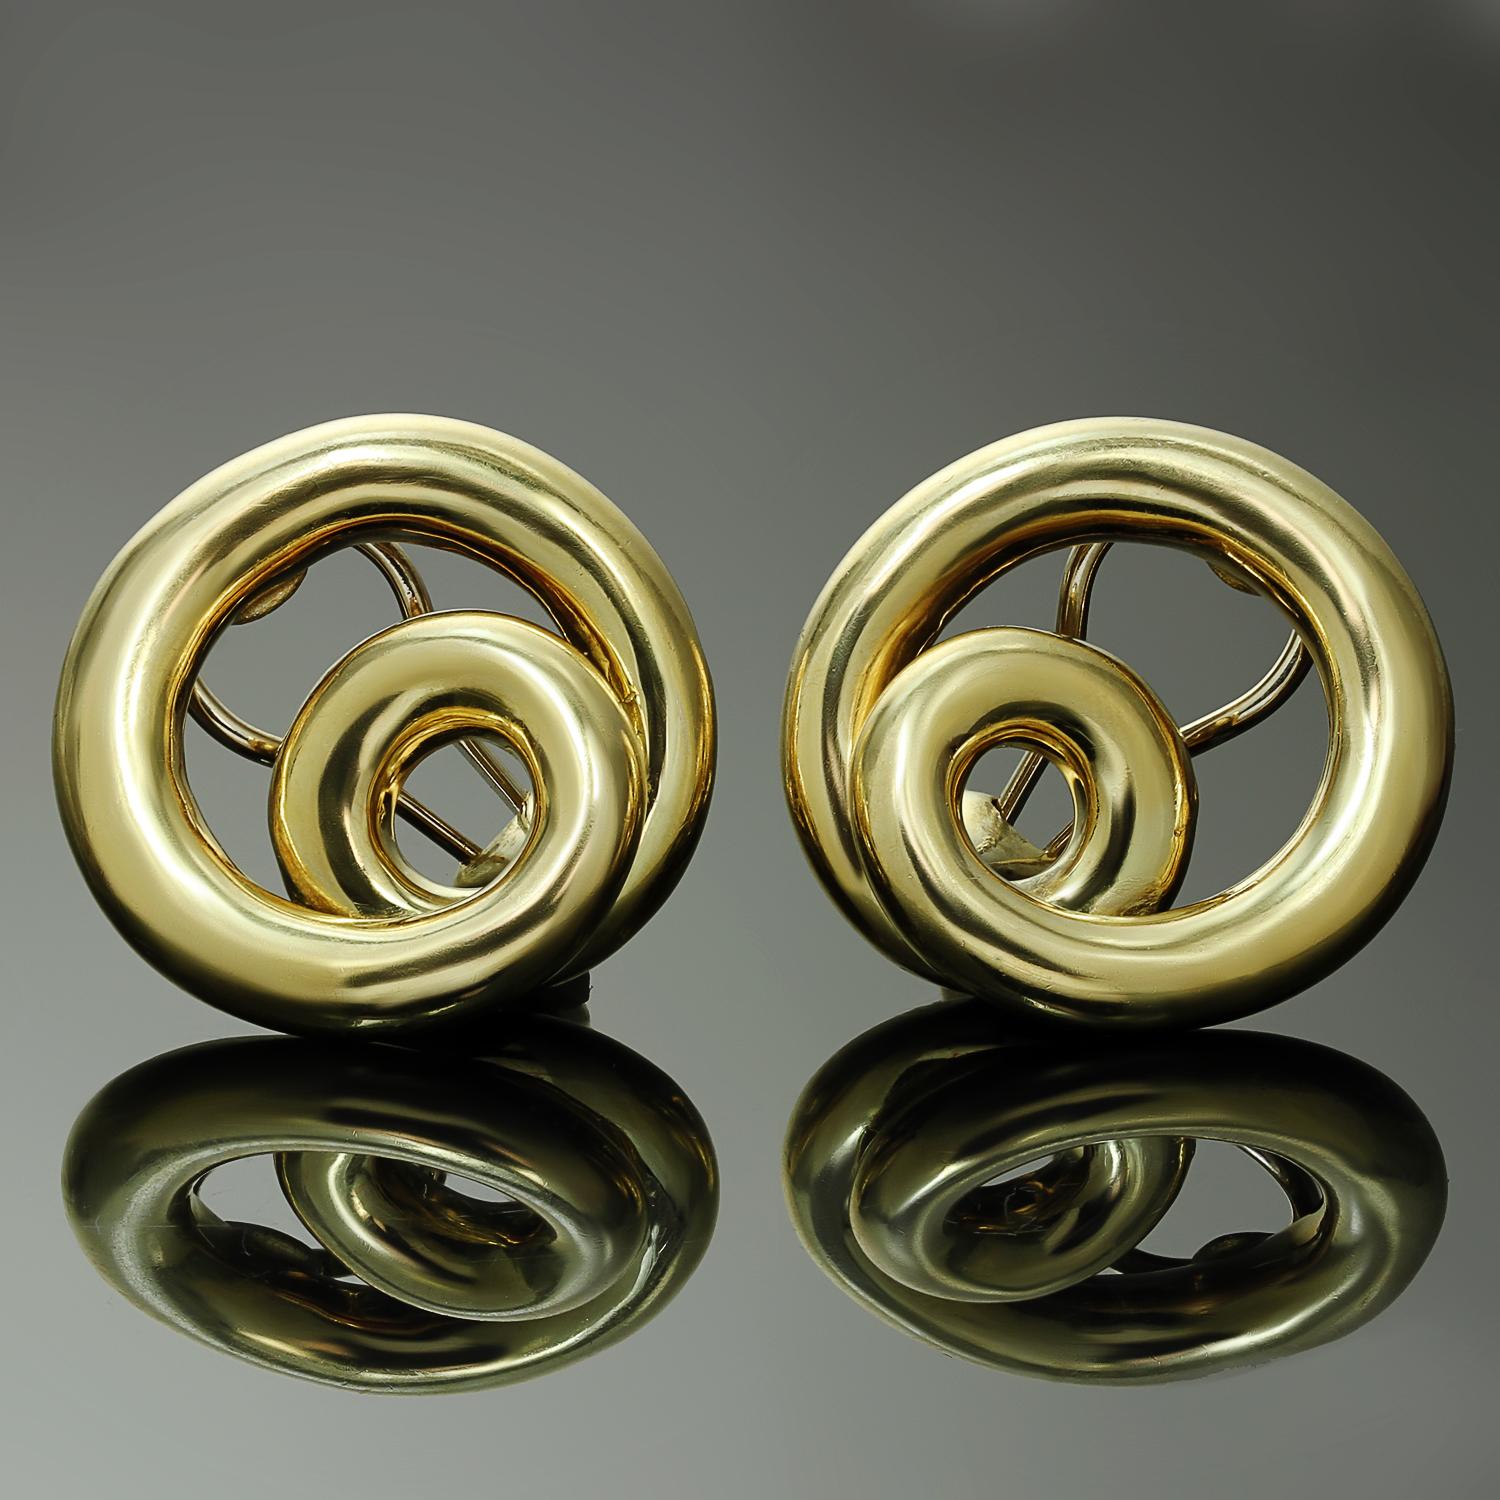 These gorgeous vintage earrings by Angela Cummings are crafted in 18k yellow gold and feature a 3-dimensional coiled swirling design completed with clip-on backs. Posts can be added upon request. Made in United States circa 1990s.  Measurements: